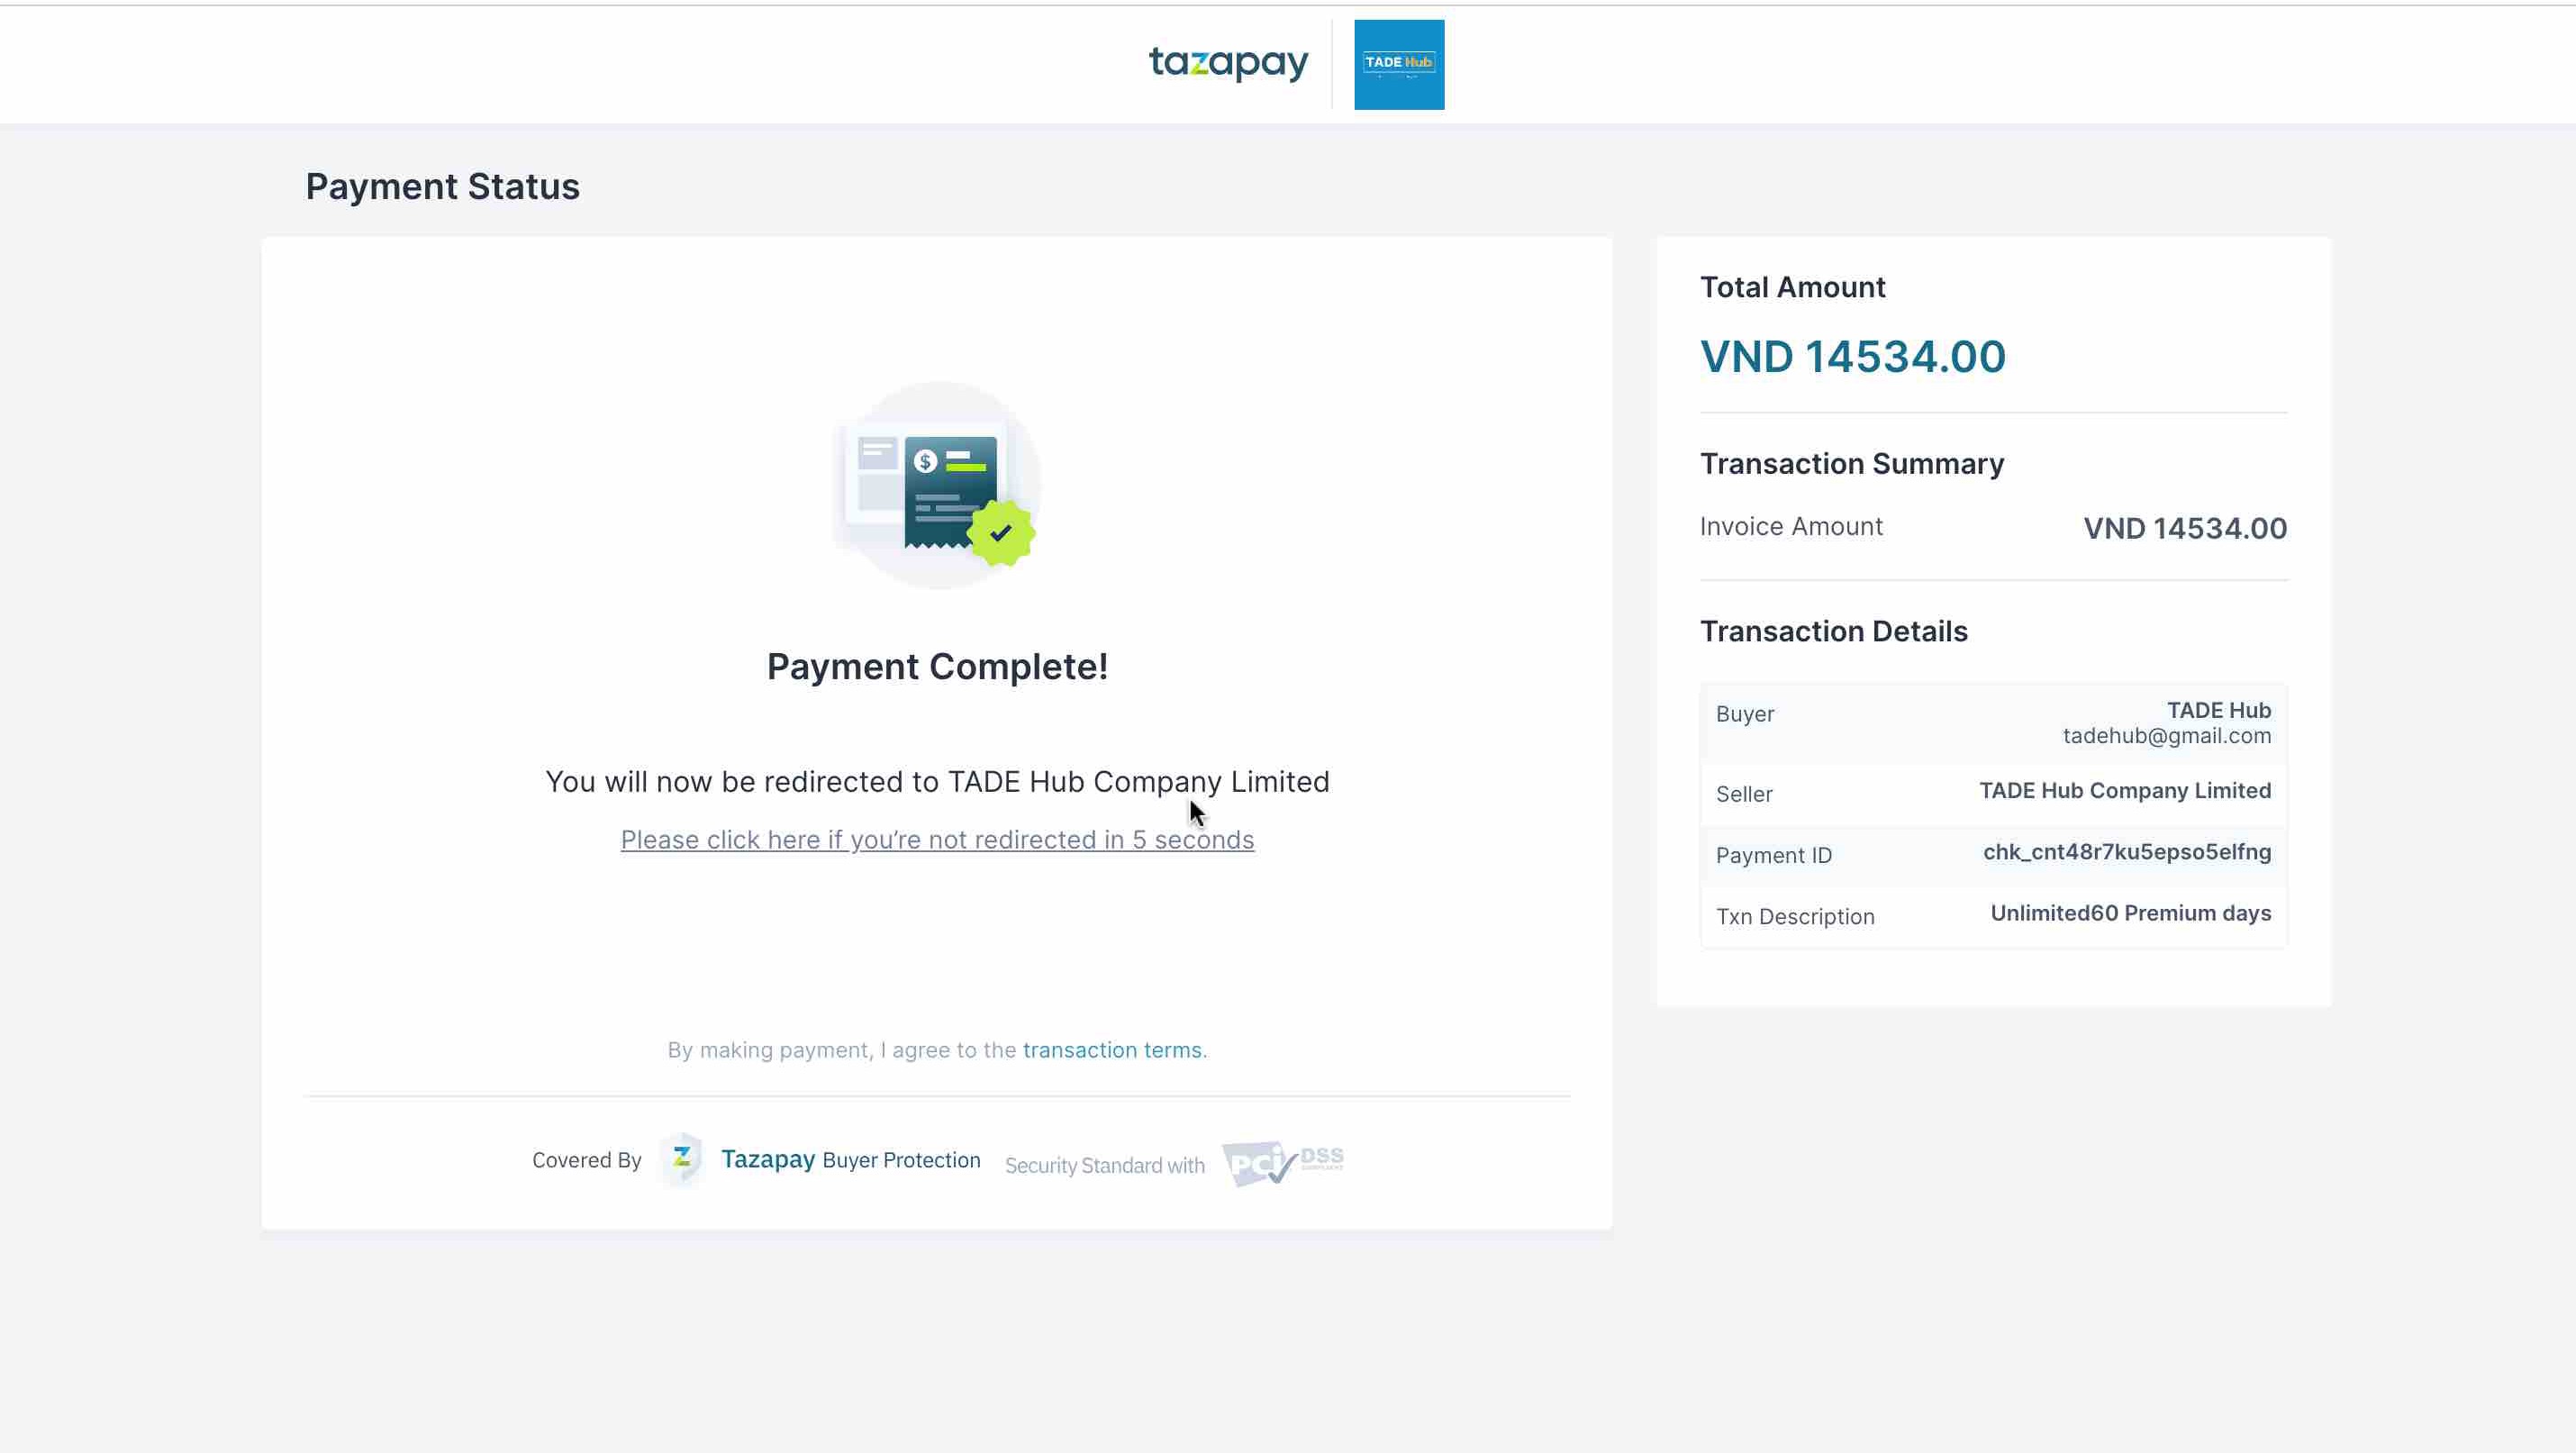 Step 3-Tazapay payment confirmed